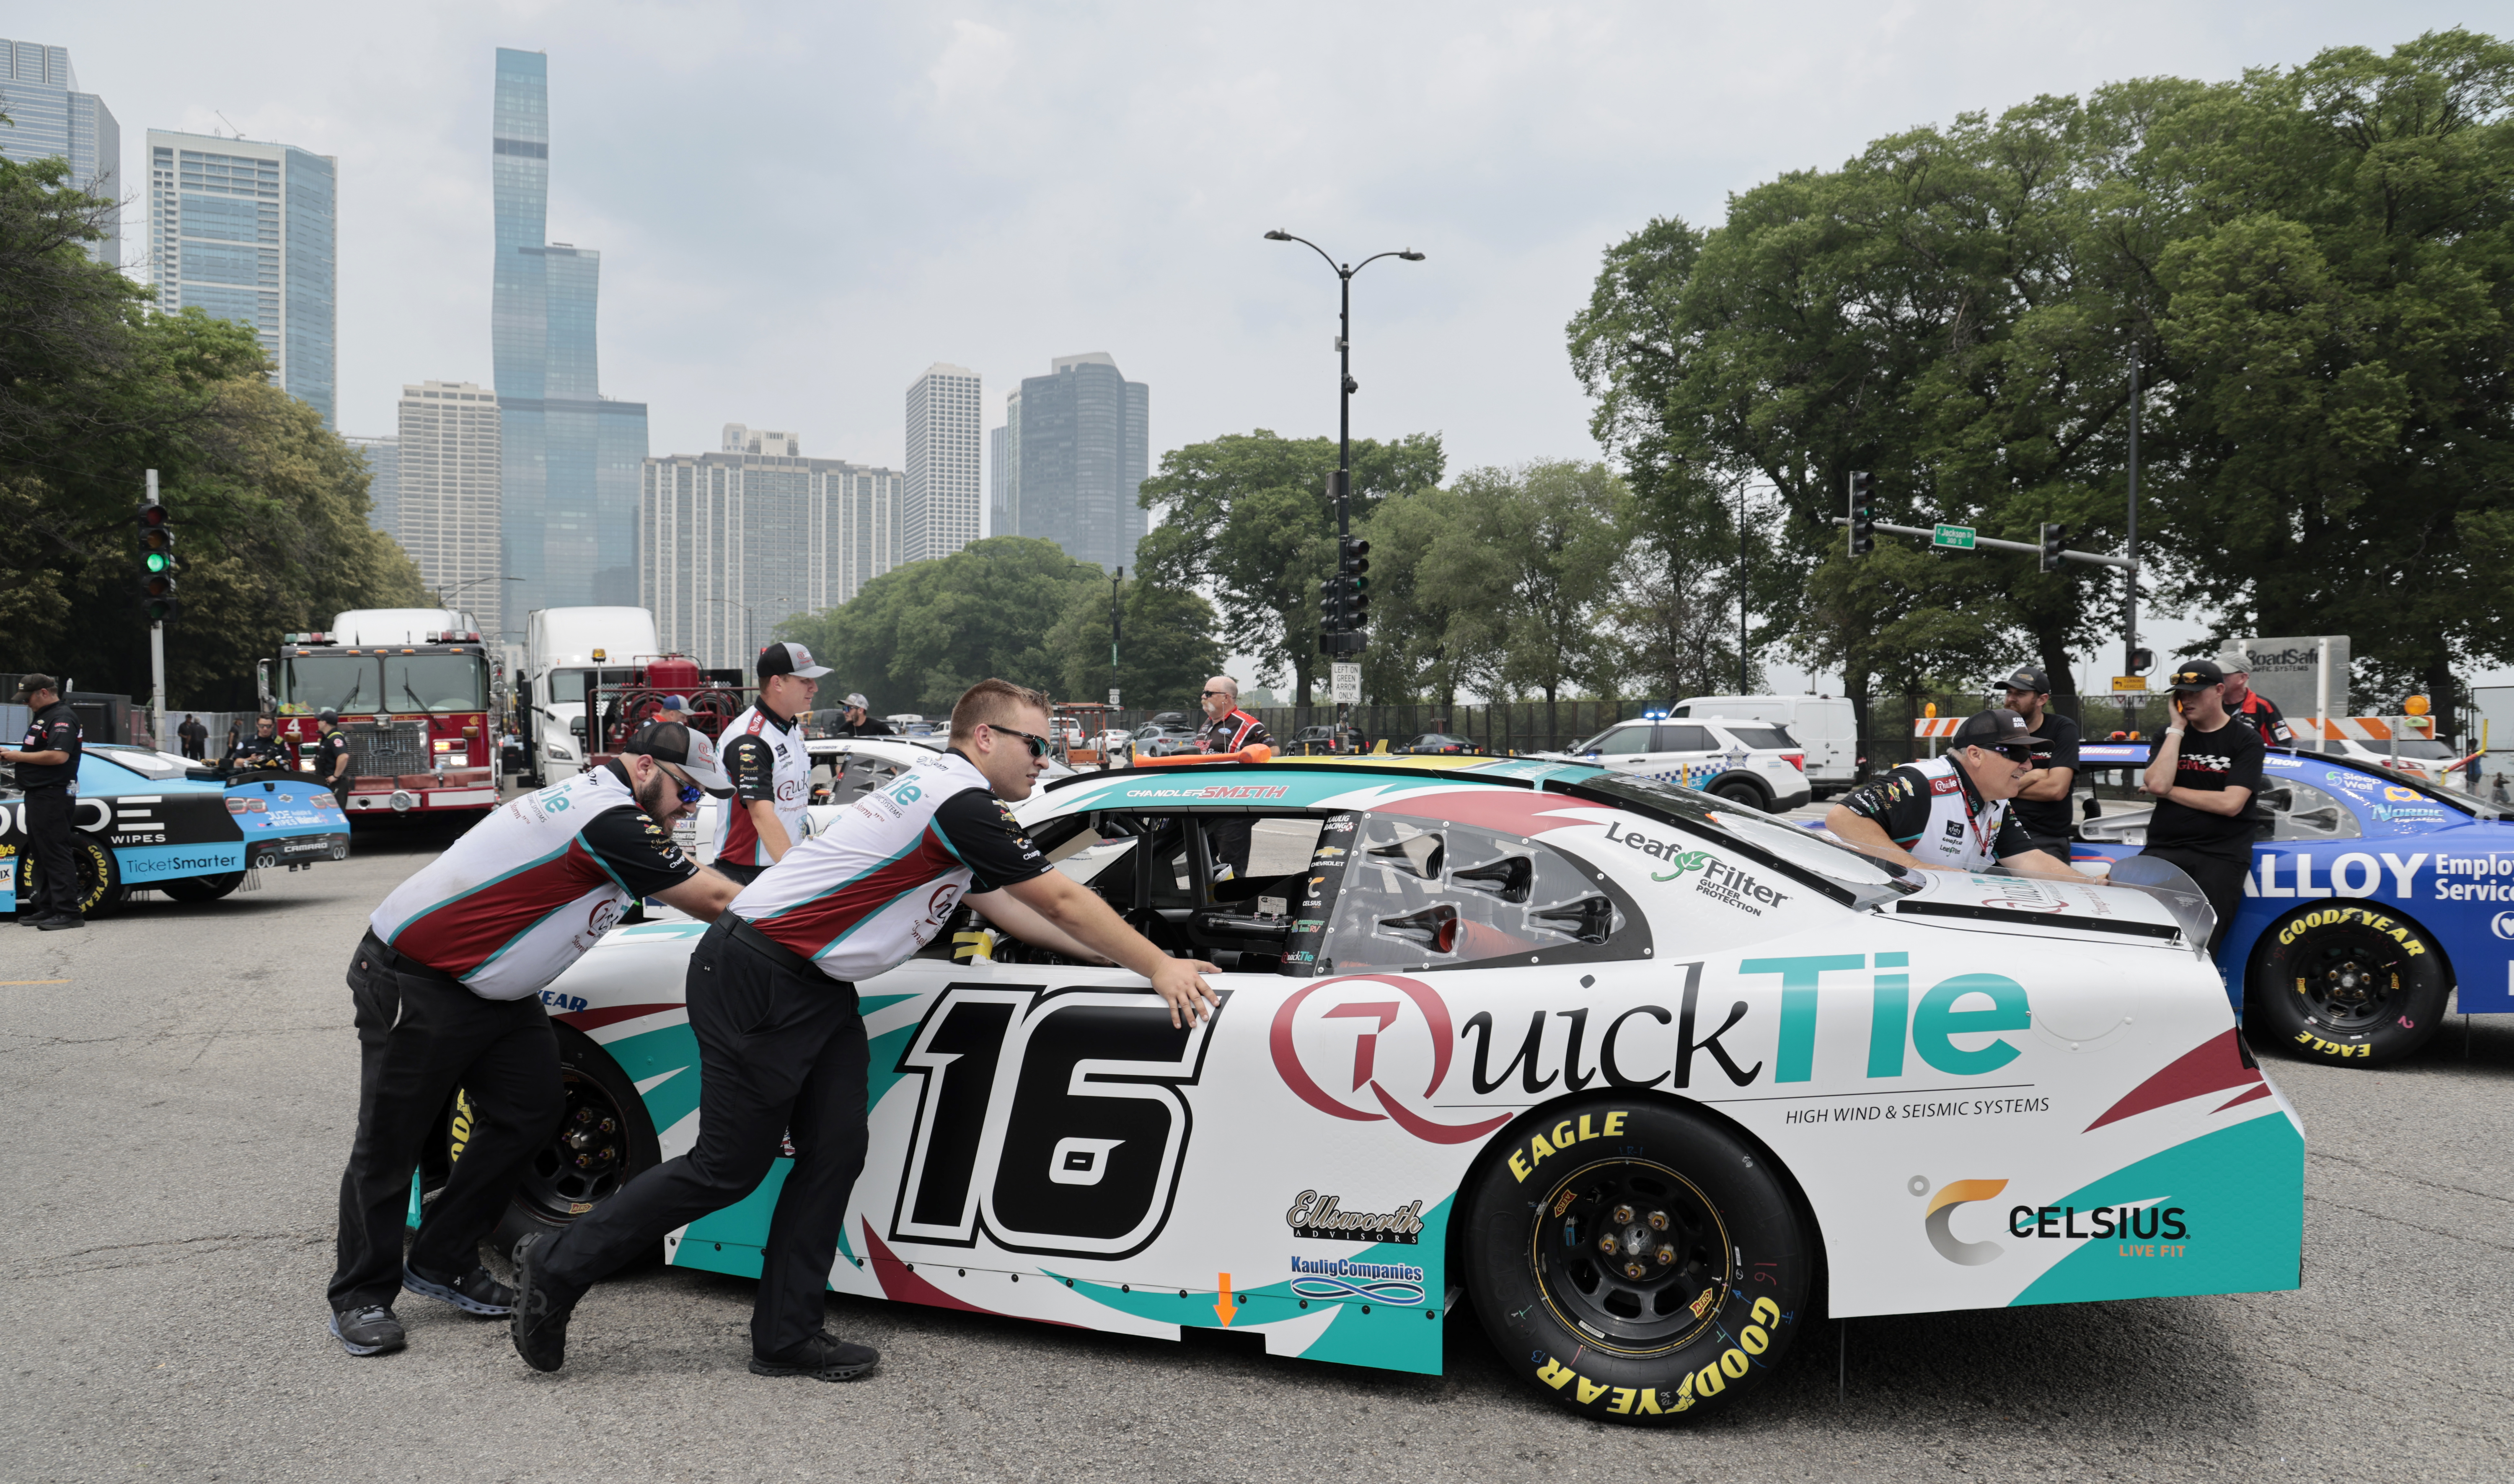 Will the NASCAR race rev up Chicagos economy as promised?